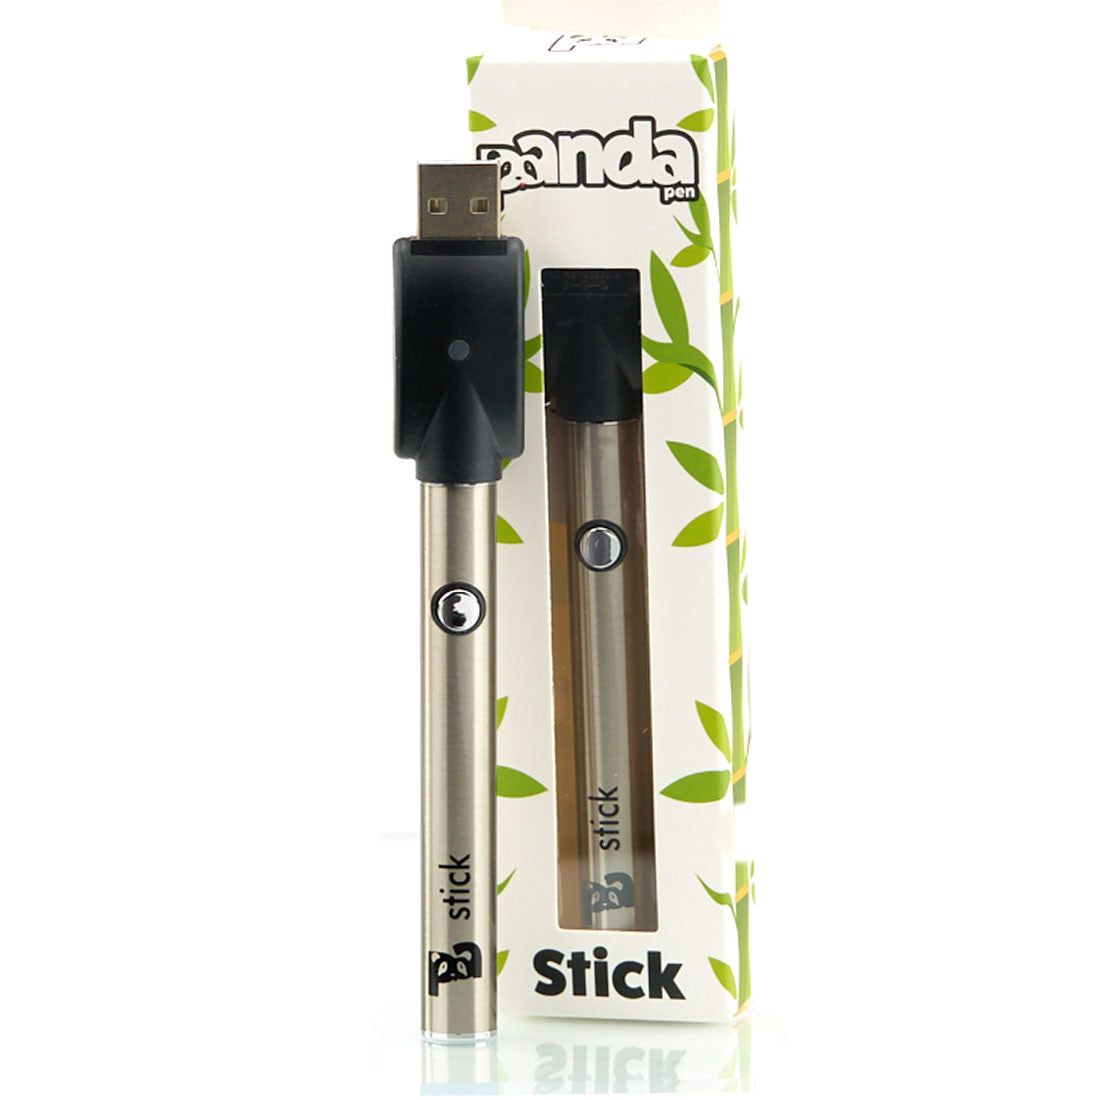 Panda Stick Pro 510 Thread Variable Voltage Cartridge Battery In multiple color options 5